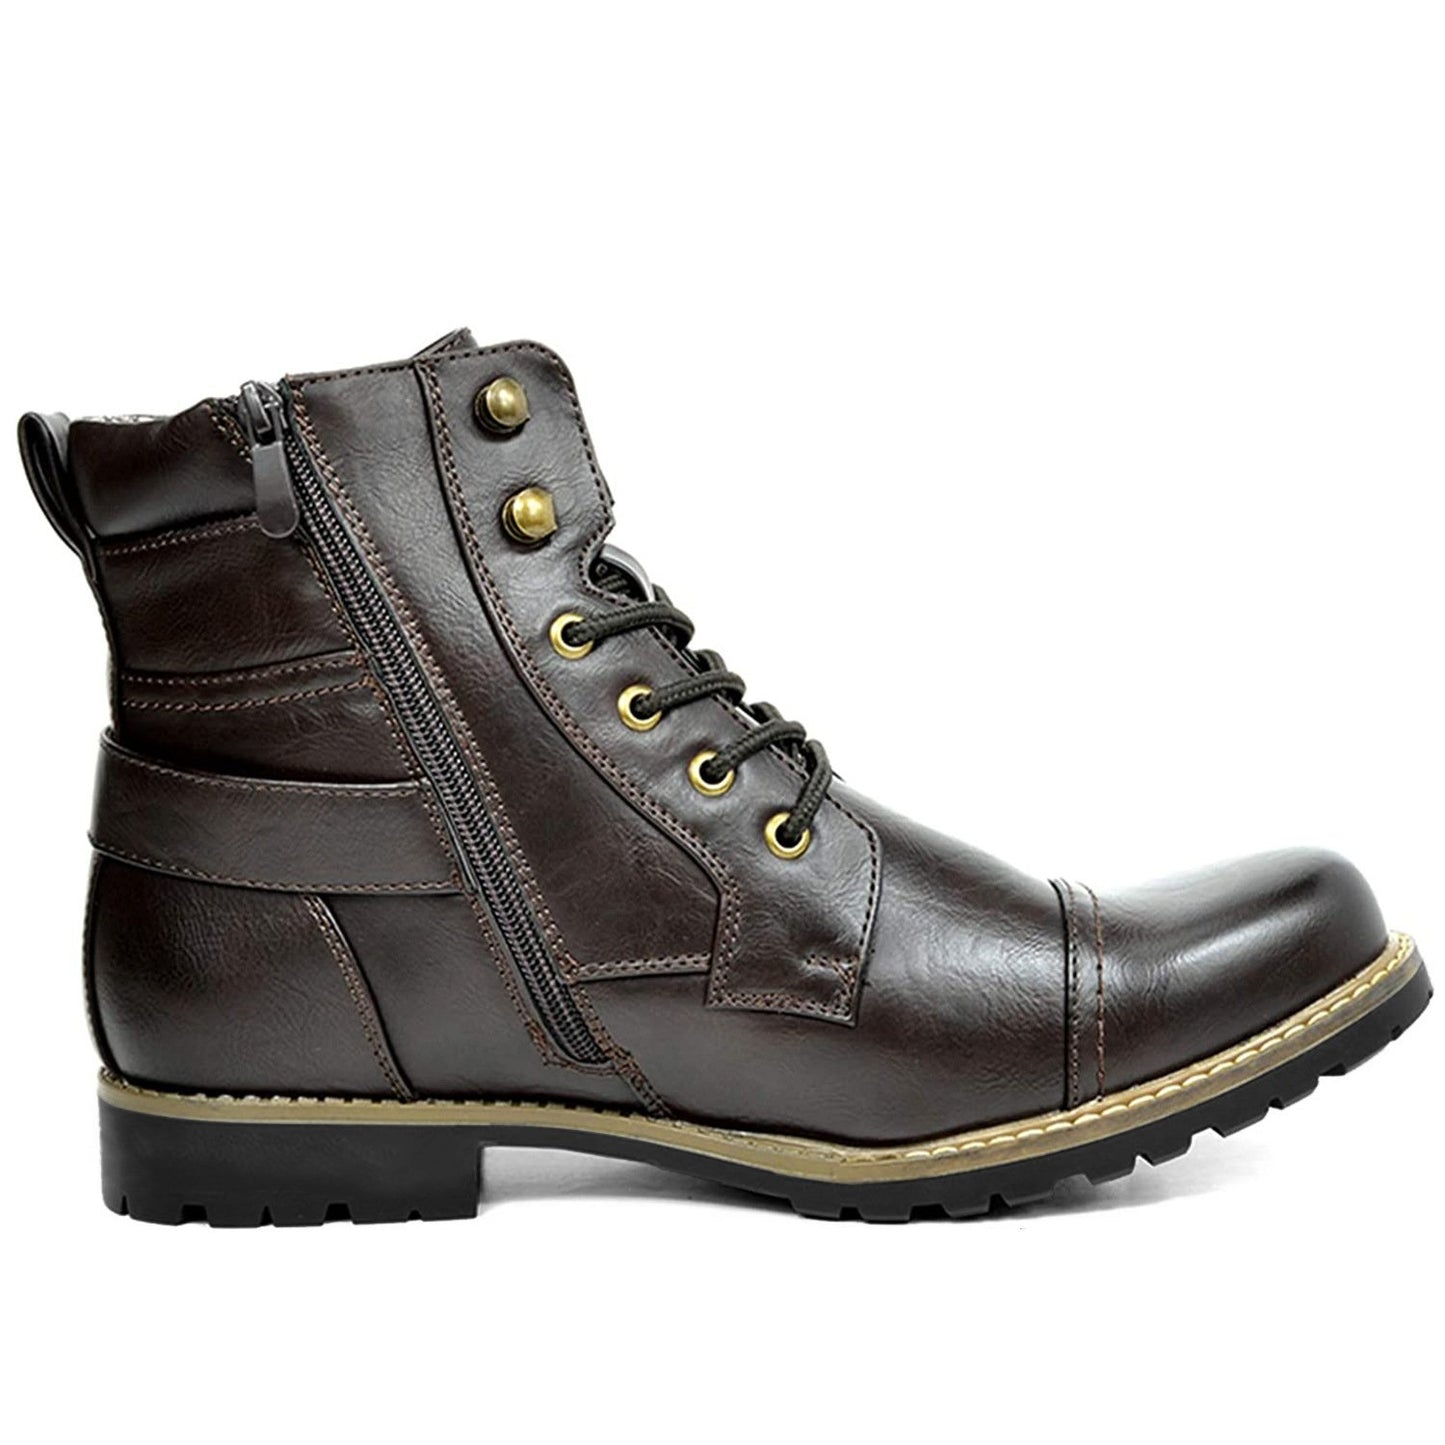 （Big Sale💥）Men's Fashionable And Comfortable Genuine Leather Motorcycle Boots(Buy 2 Free Shipping✔️)